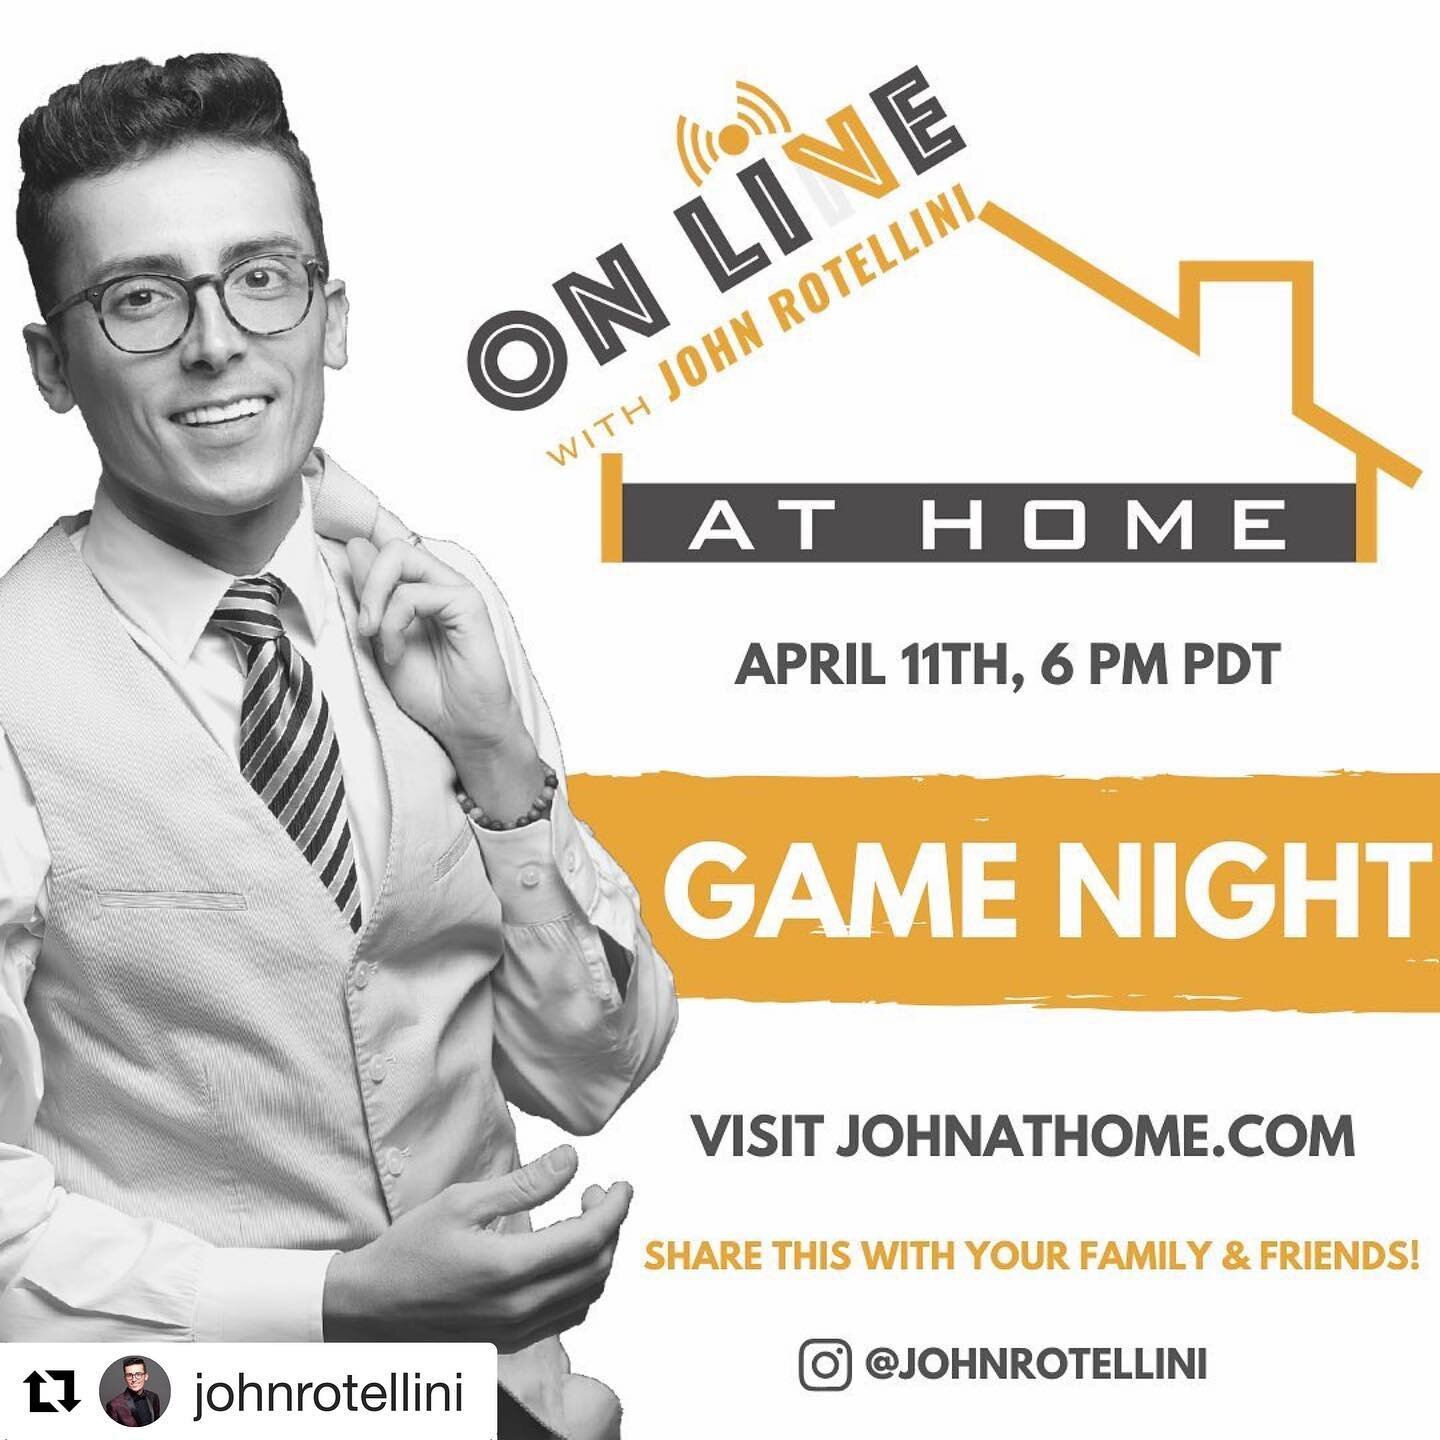 #Repost @johnrotellini ・・・
Tonight&rsquo;s the night! Join me at 6 PM PDT as I bring GAME NIGHT to you virtually from my living room. Visit JohnAtHome.com to join in on the fun and share this with your loved ones!
.
.
.
.
.
#JohnAtHome #JohnOnLive #O